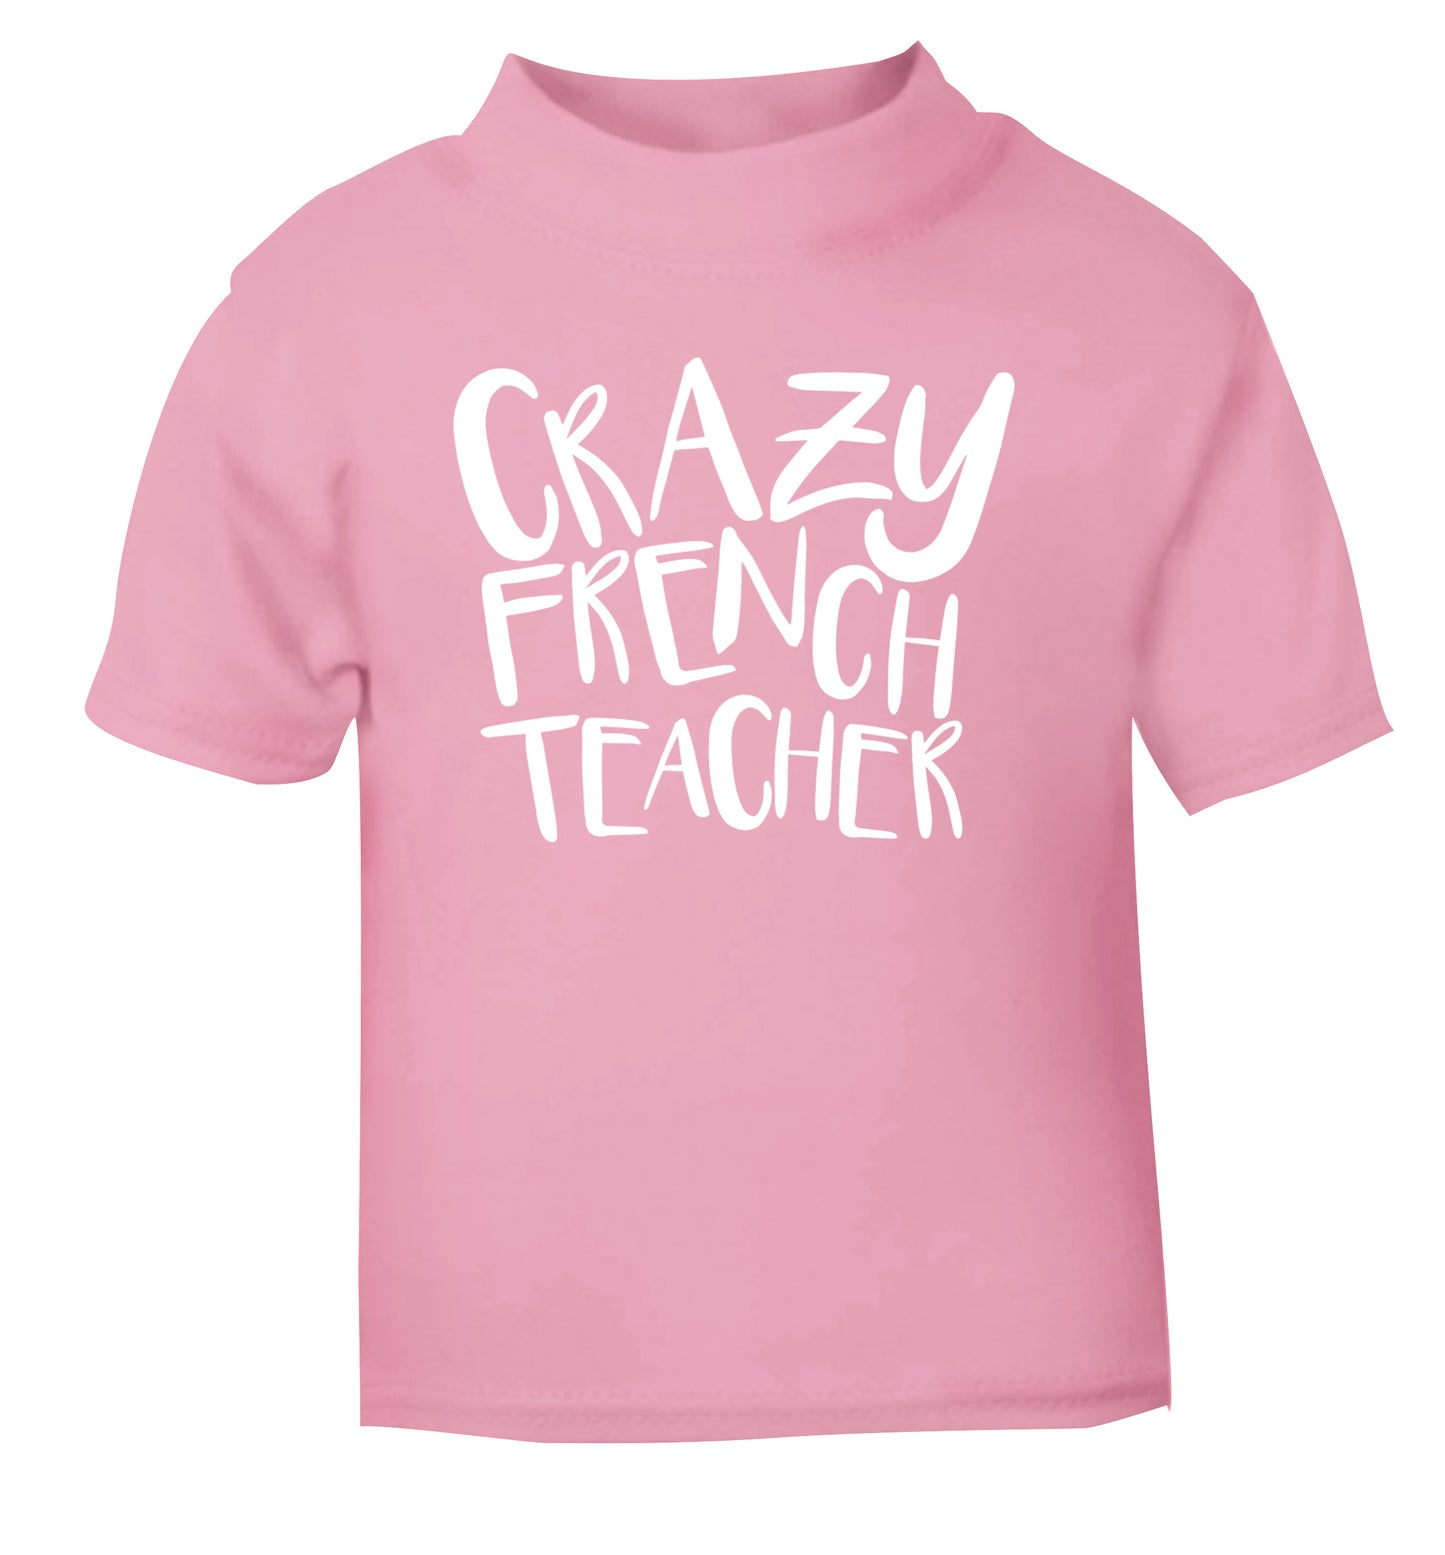 Crazy french teacher light pink Baby Toddler Tshirt 2 Years